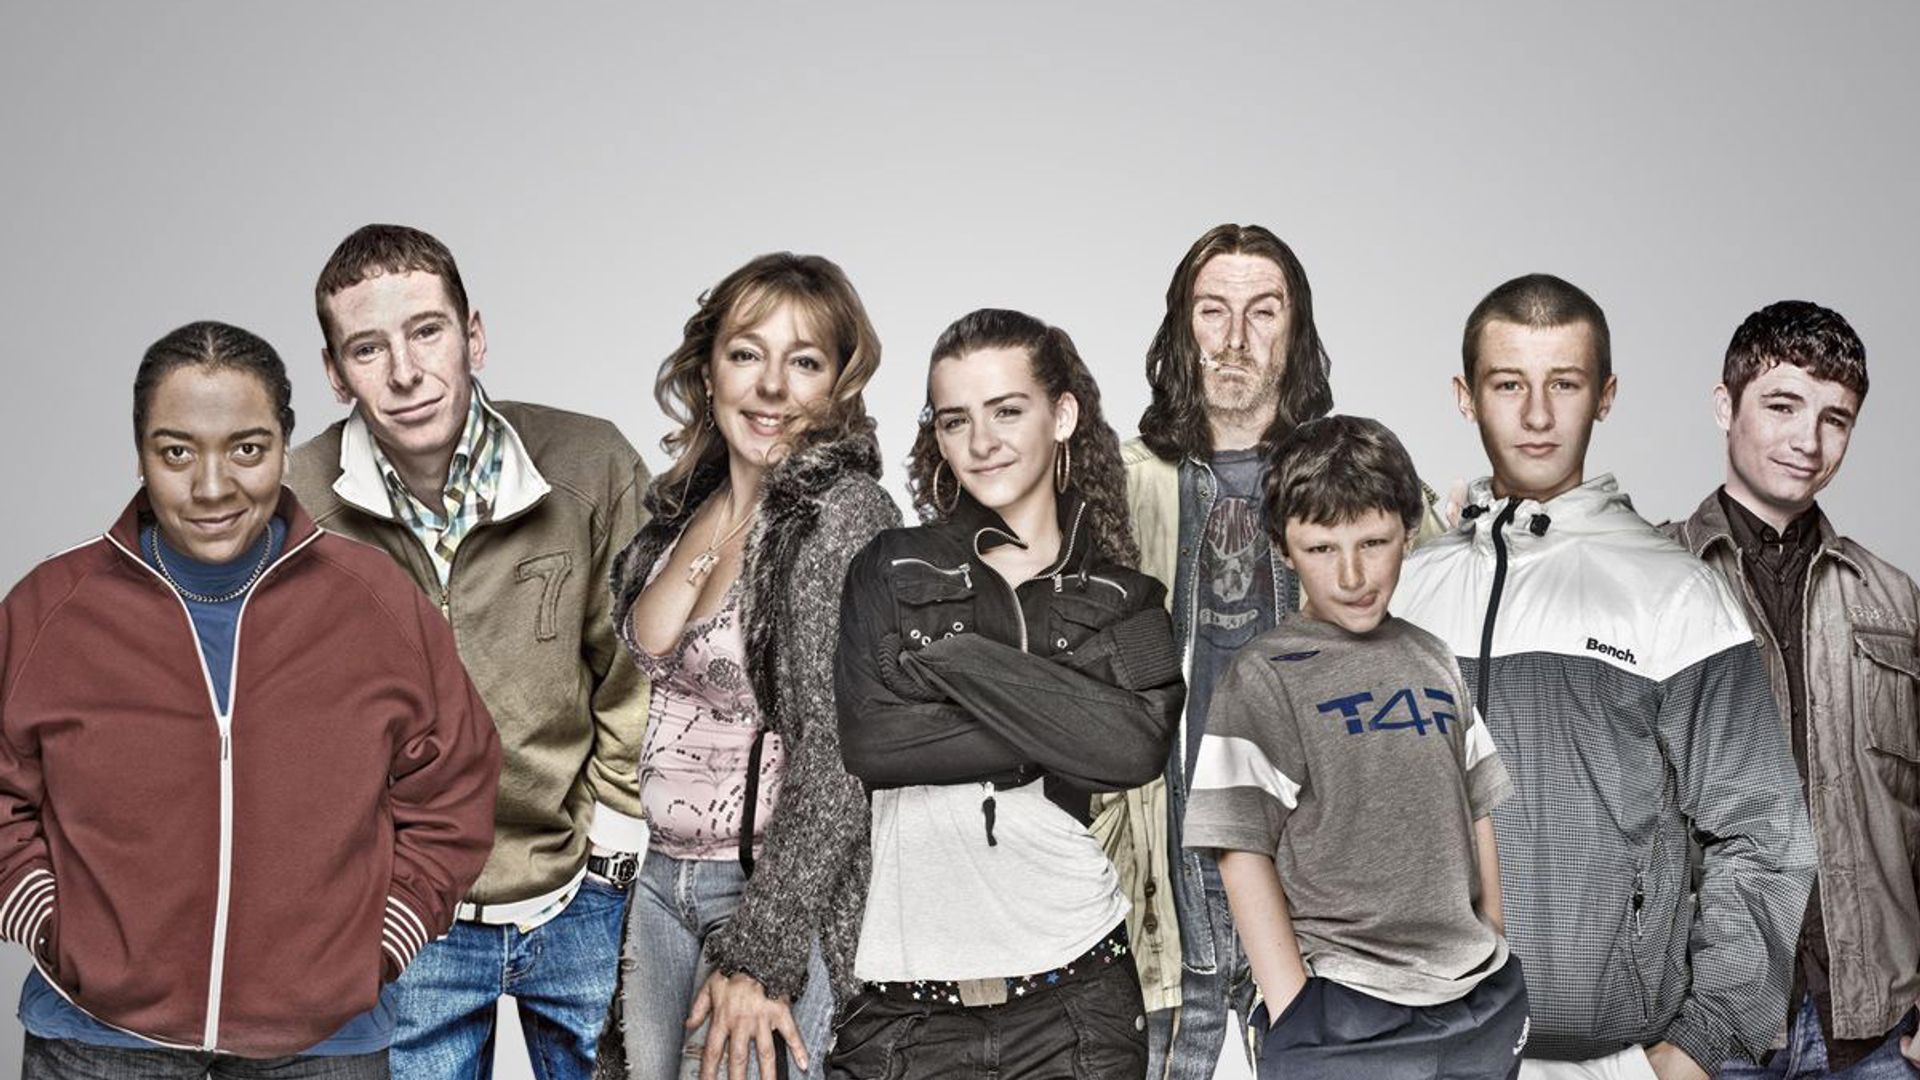 Shameless star Jody Latham opens up about decision to leave show